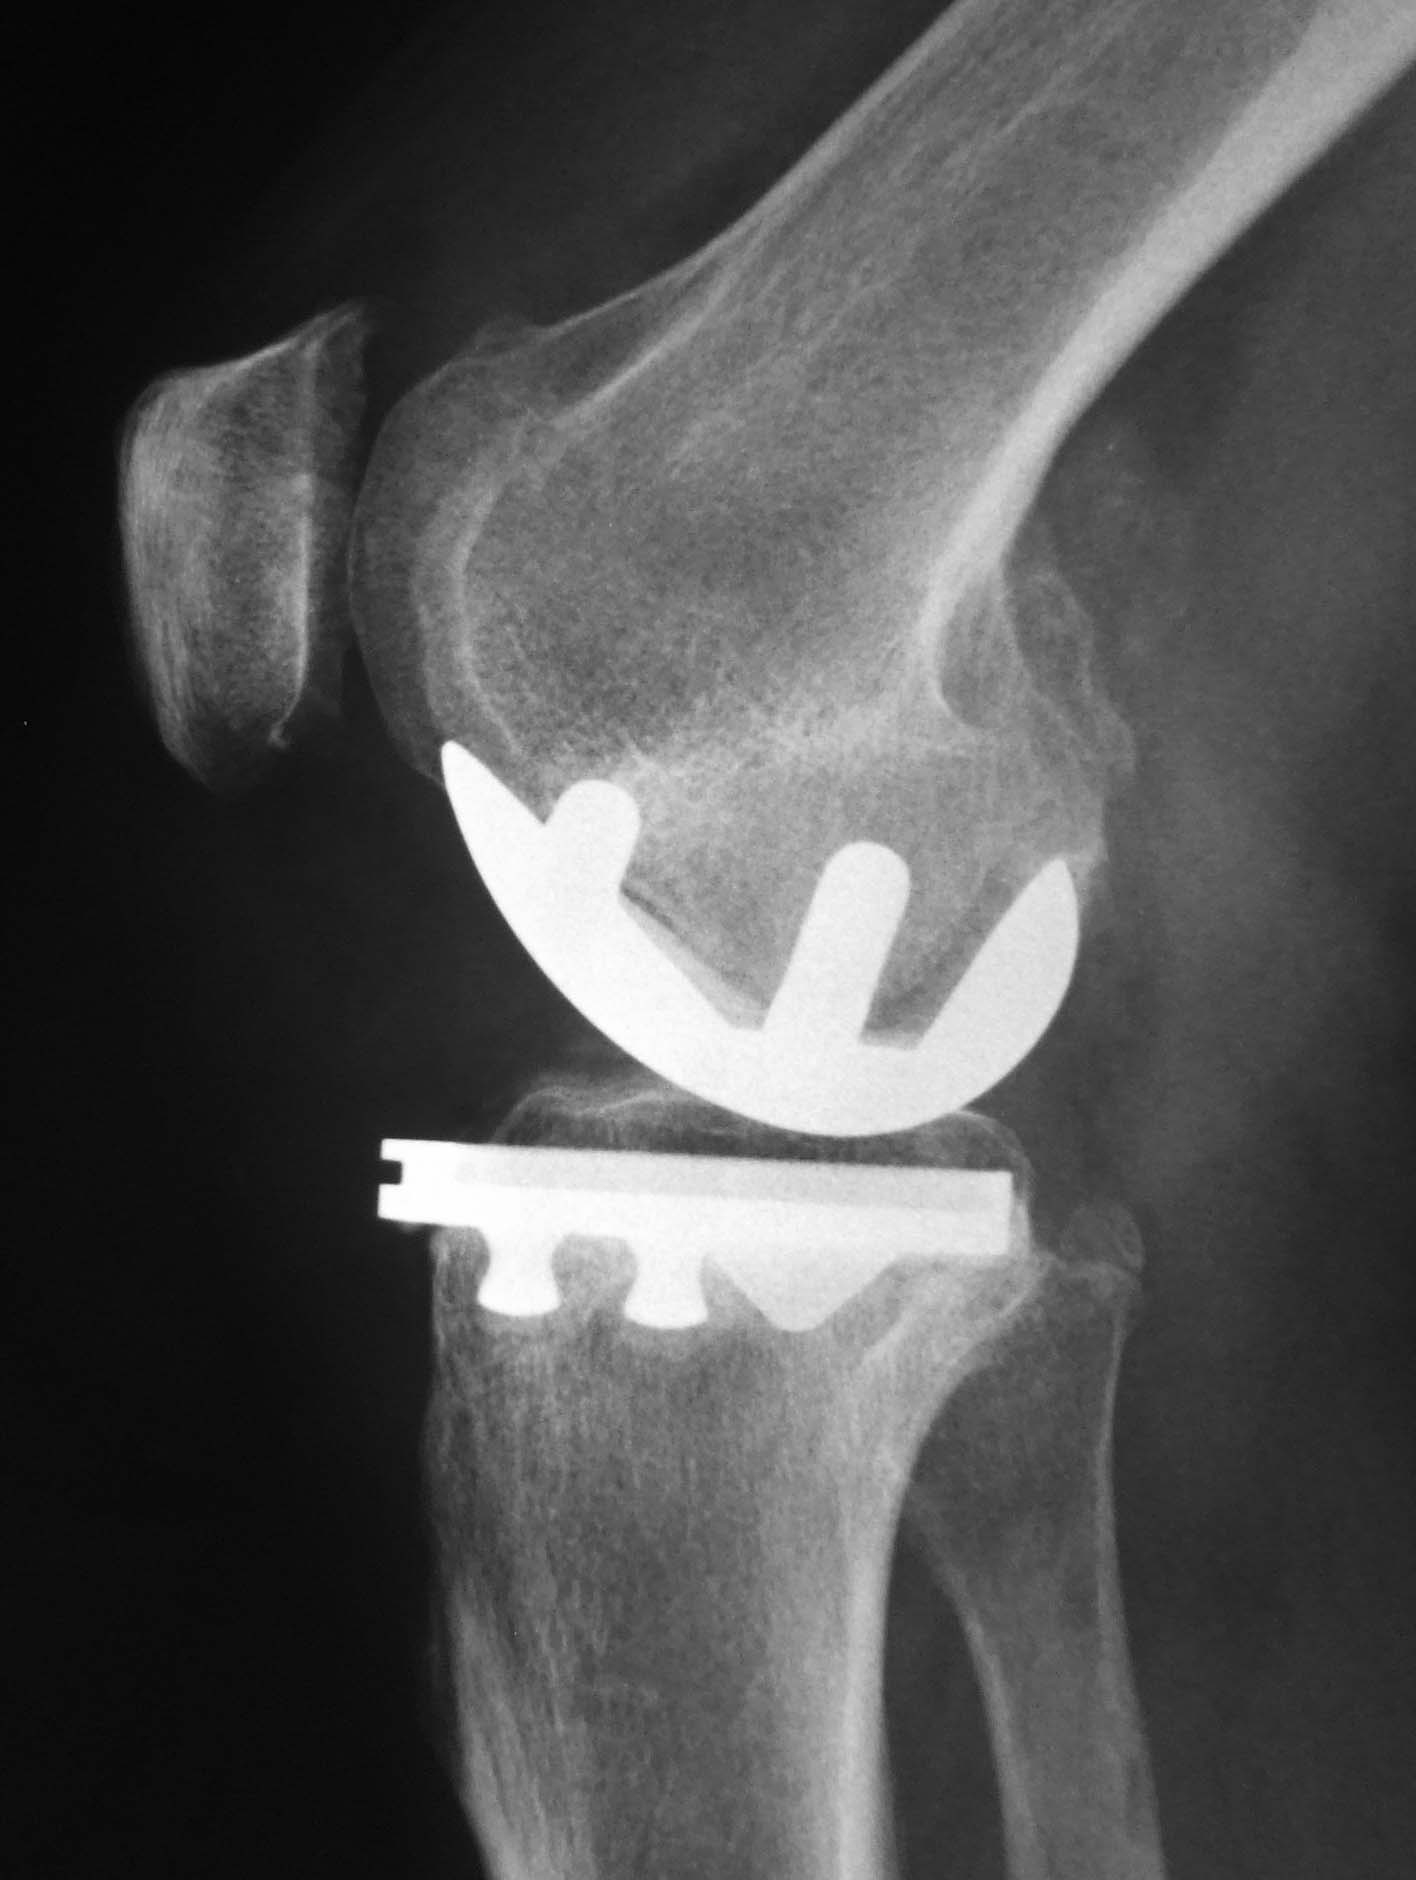 knee replacement